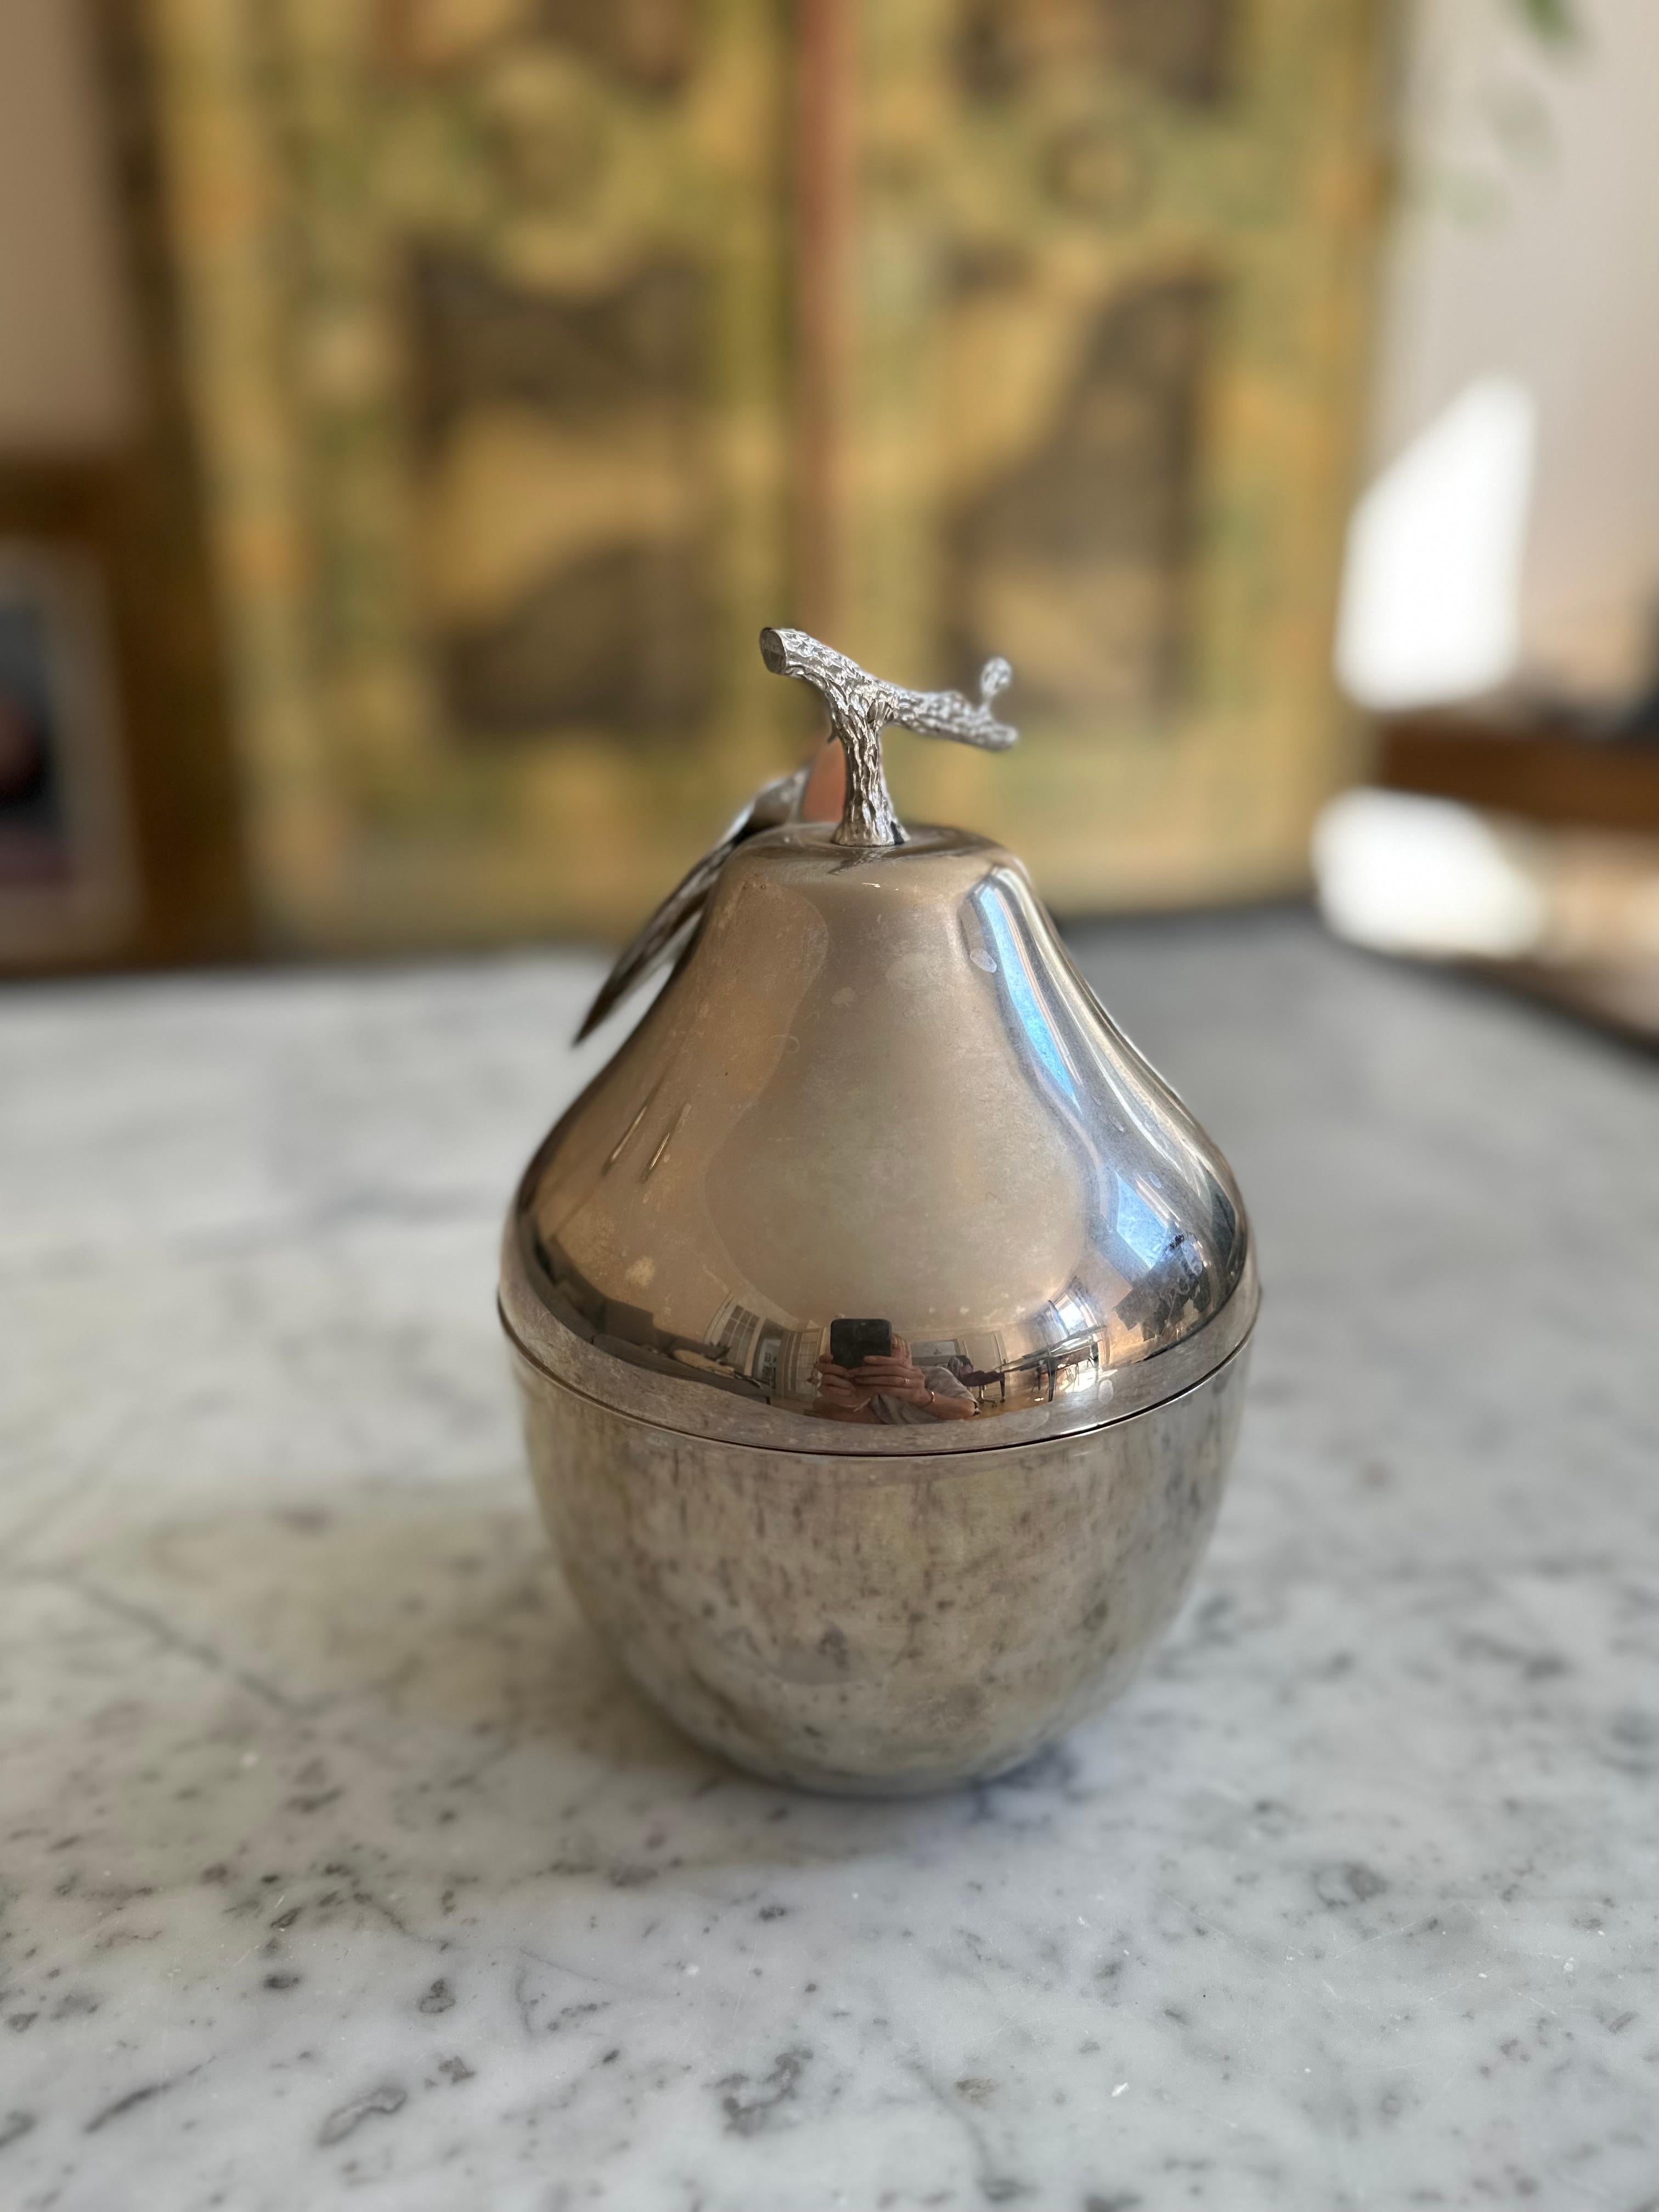 ntroducing a timeless piece of the 1970s, this Pear-shaped Ice Cooler from the Turnwald Collection is a true gem. Designed in the Hollywood Regency style, it encapsulates the glamour and elegance of that era.

Crafted from silver-colored plastic,